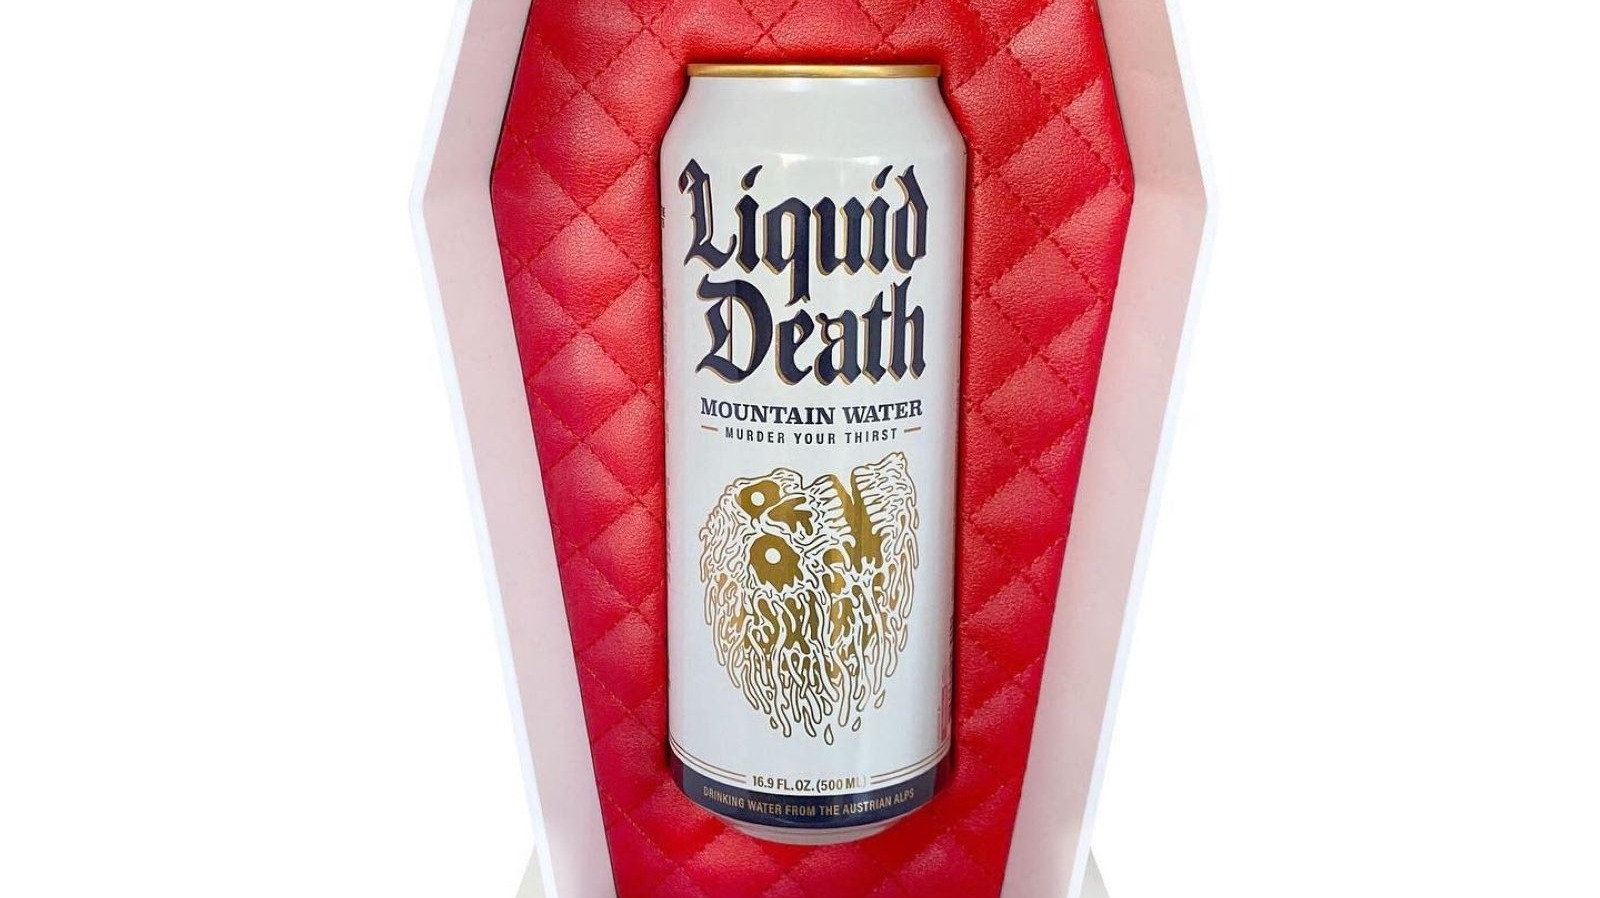 What Is Liquid Death? The Canned Water Trend, Explained